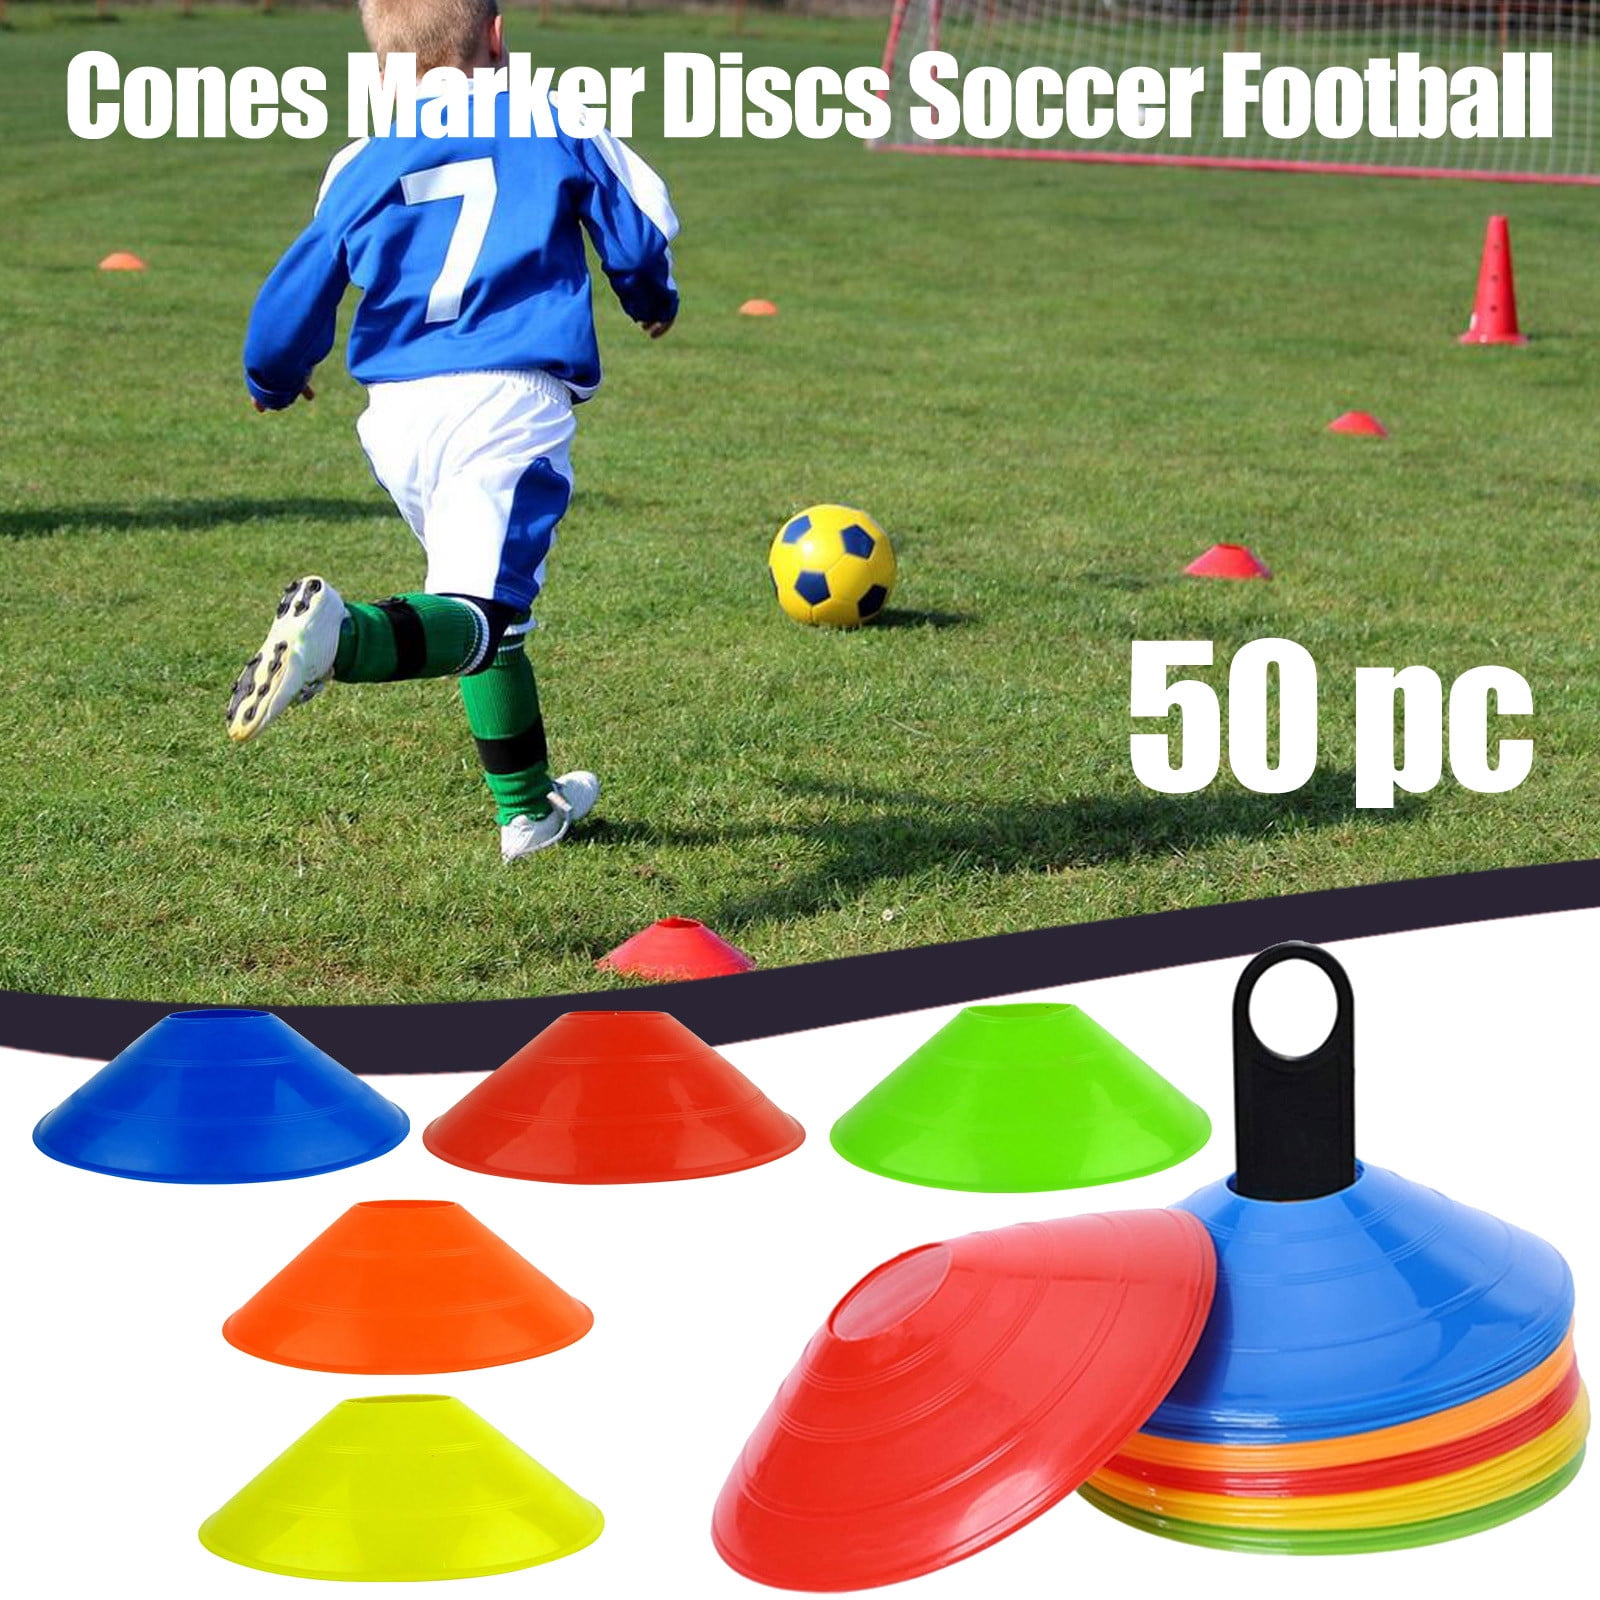 Football Soccer Marker Disc Training Sports Plate Cones Equipment Multicolor Hot 